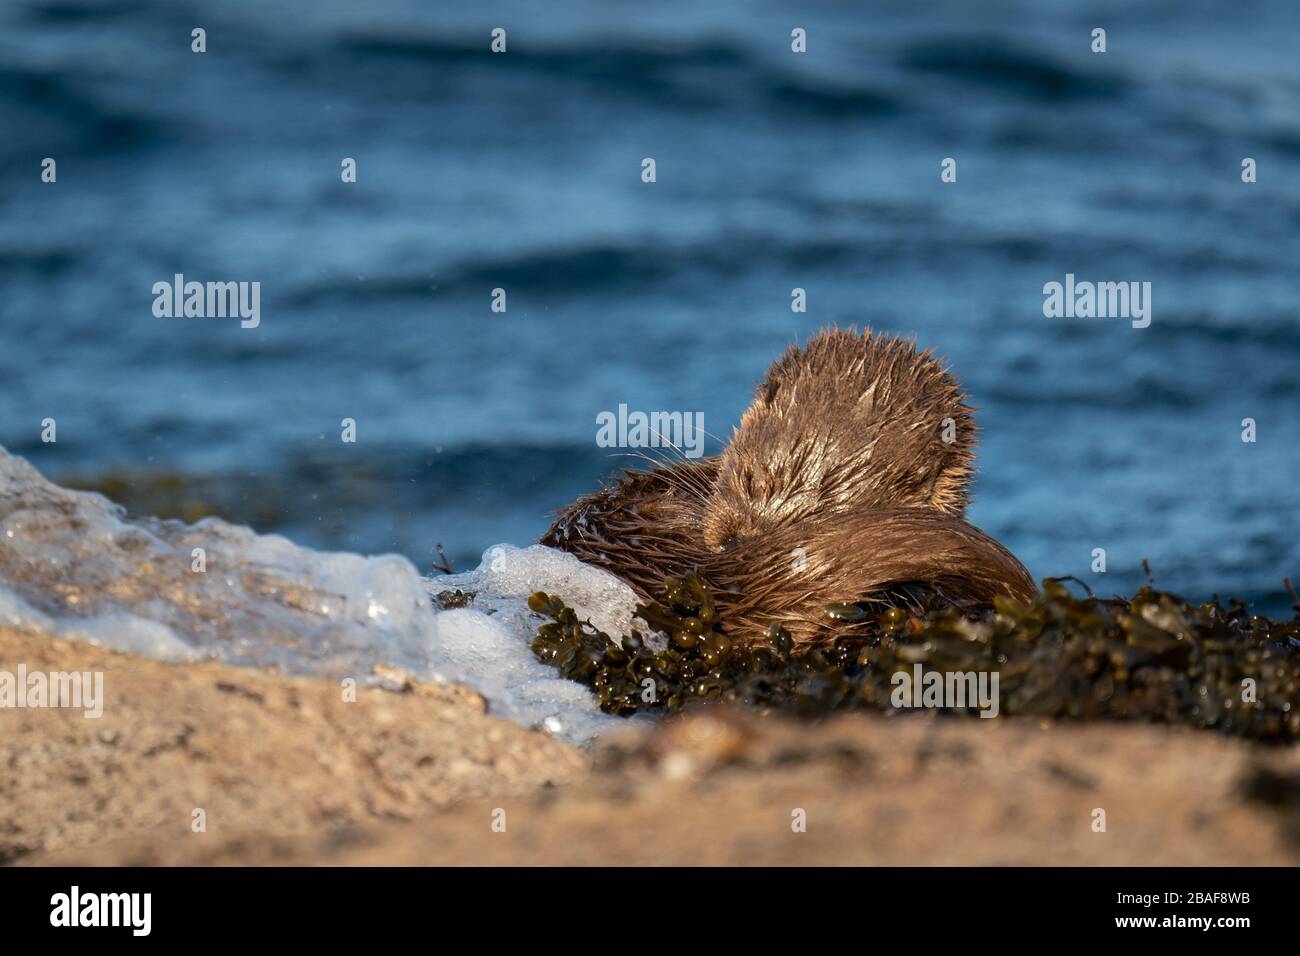 Close up of European Otter cub or kit sleeping peacefully, curled up on its tail Stock Photo